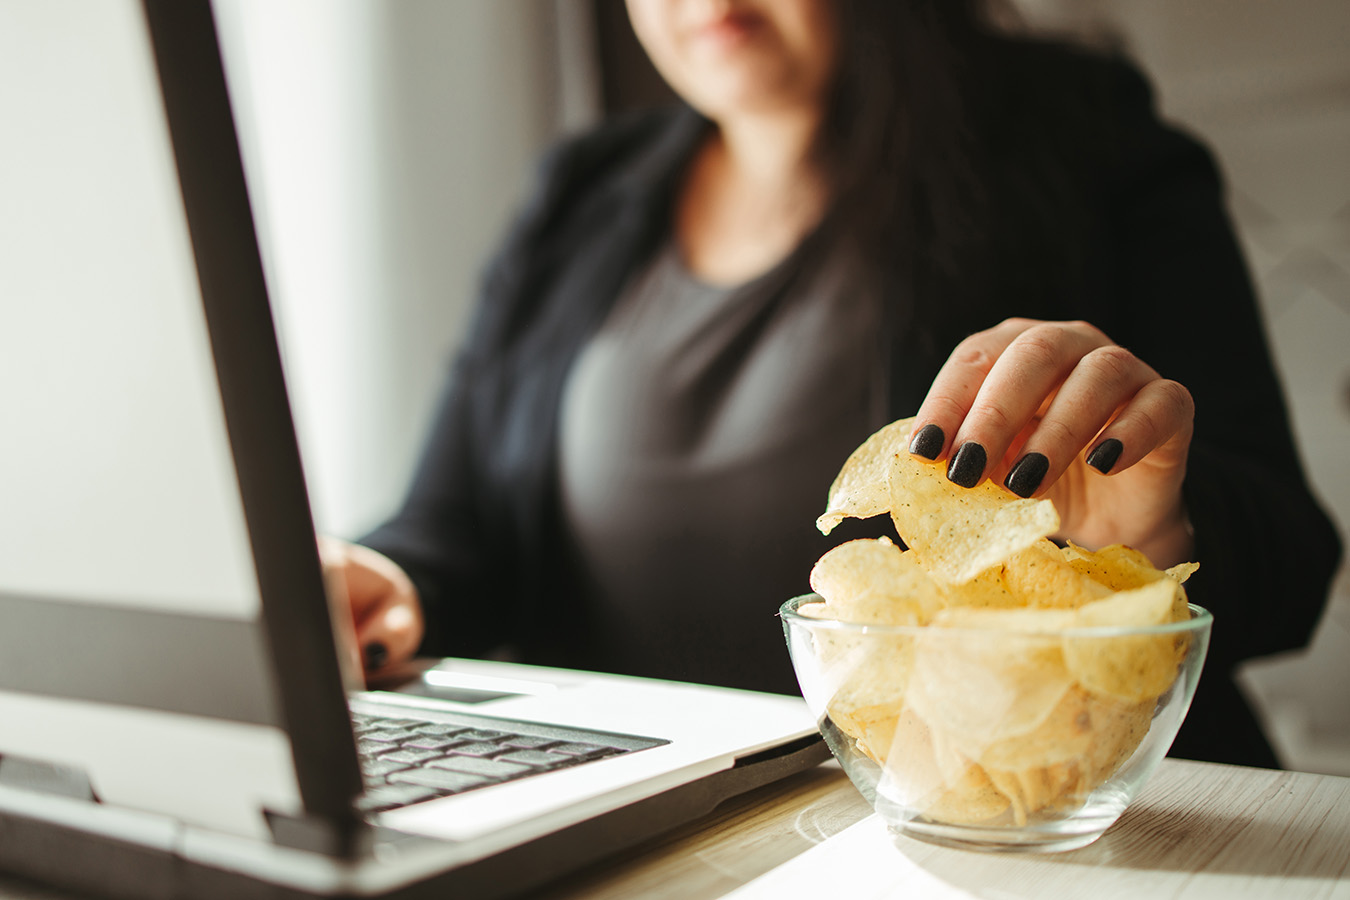 Woman mindless reaches for chips while at the computer.